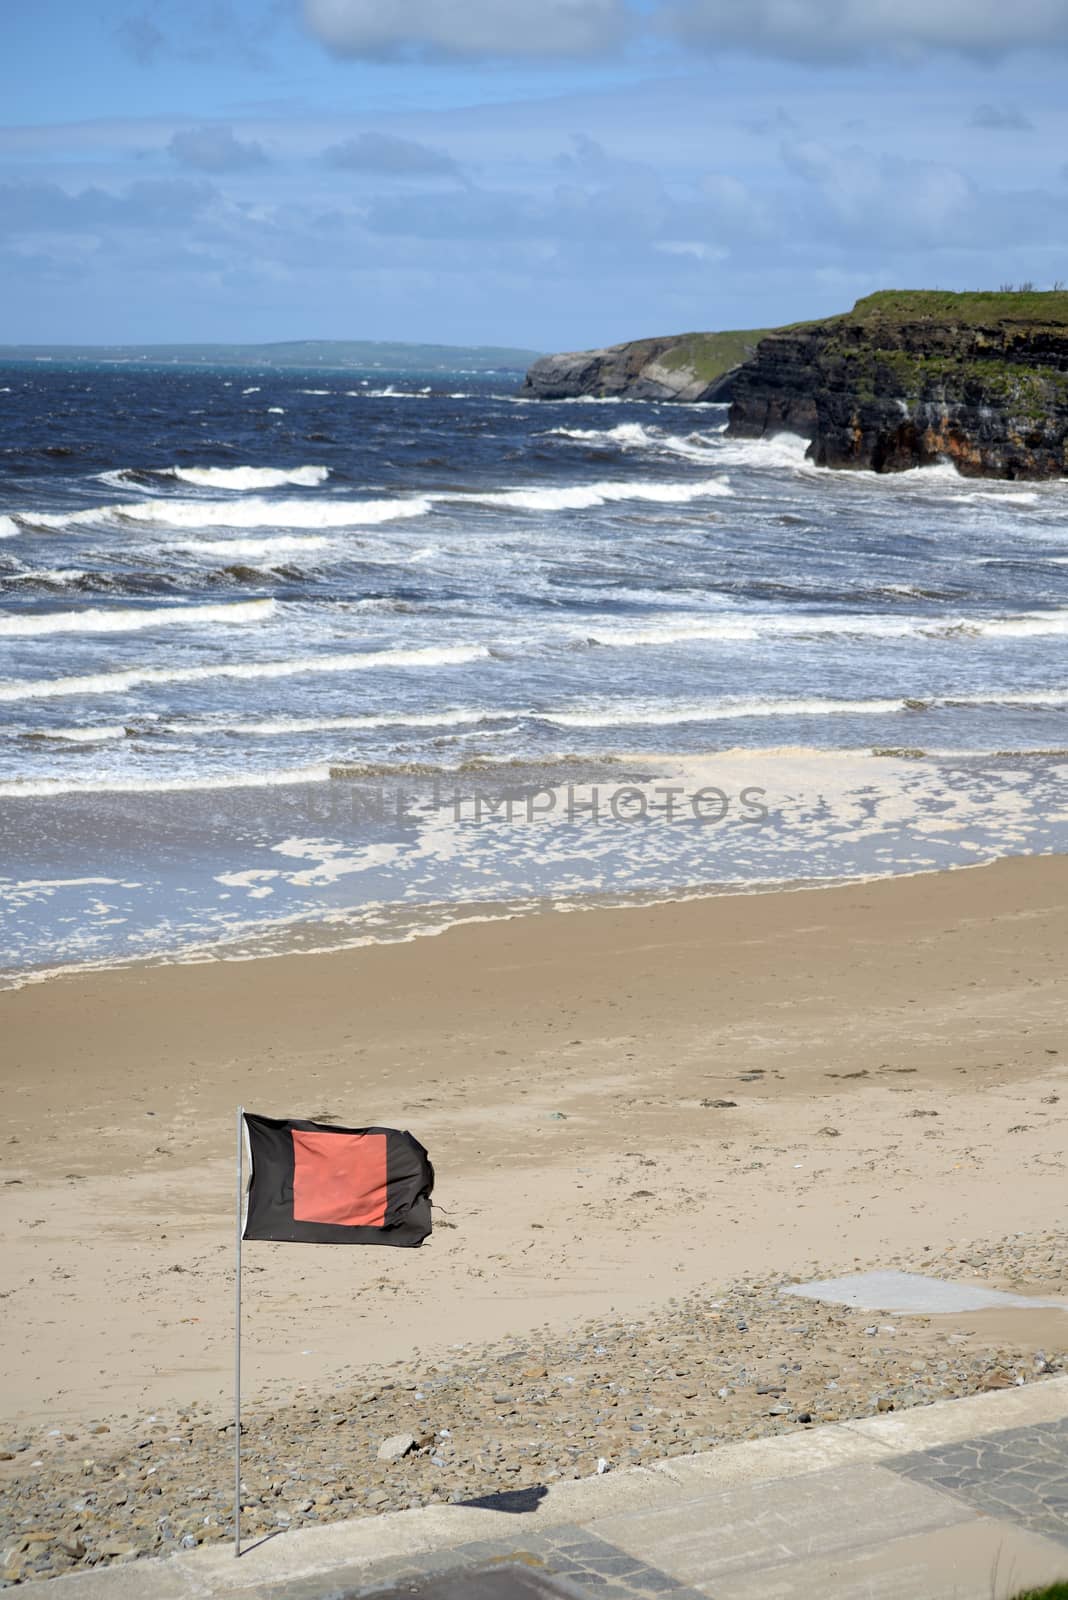 quicksilver flag flying beside surf school with ballybunionbeach and cliffs in background